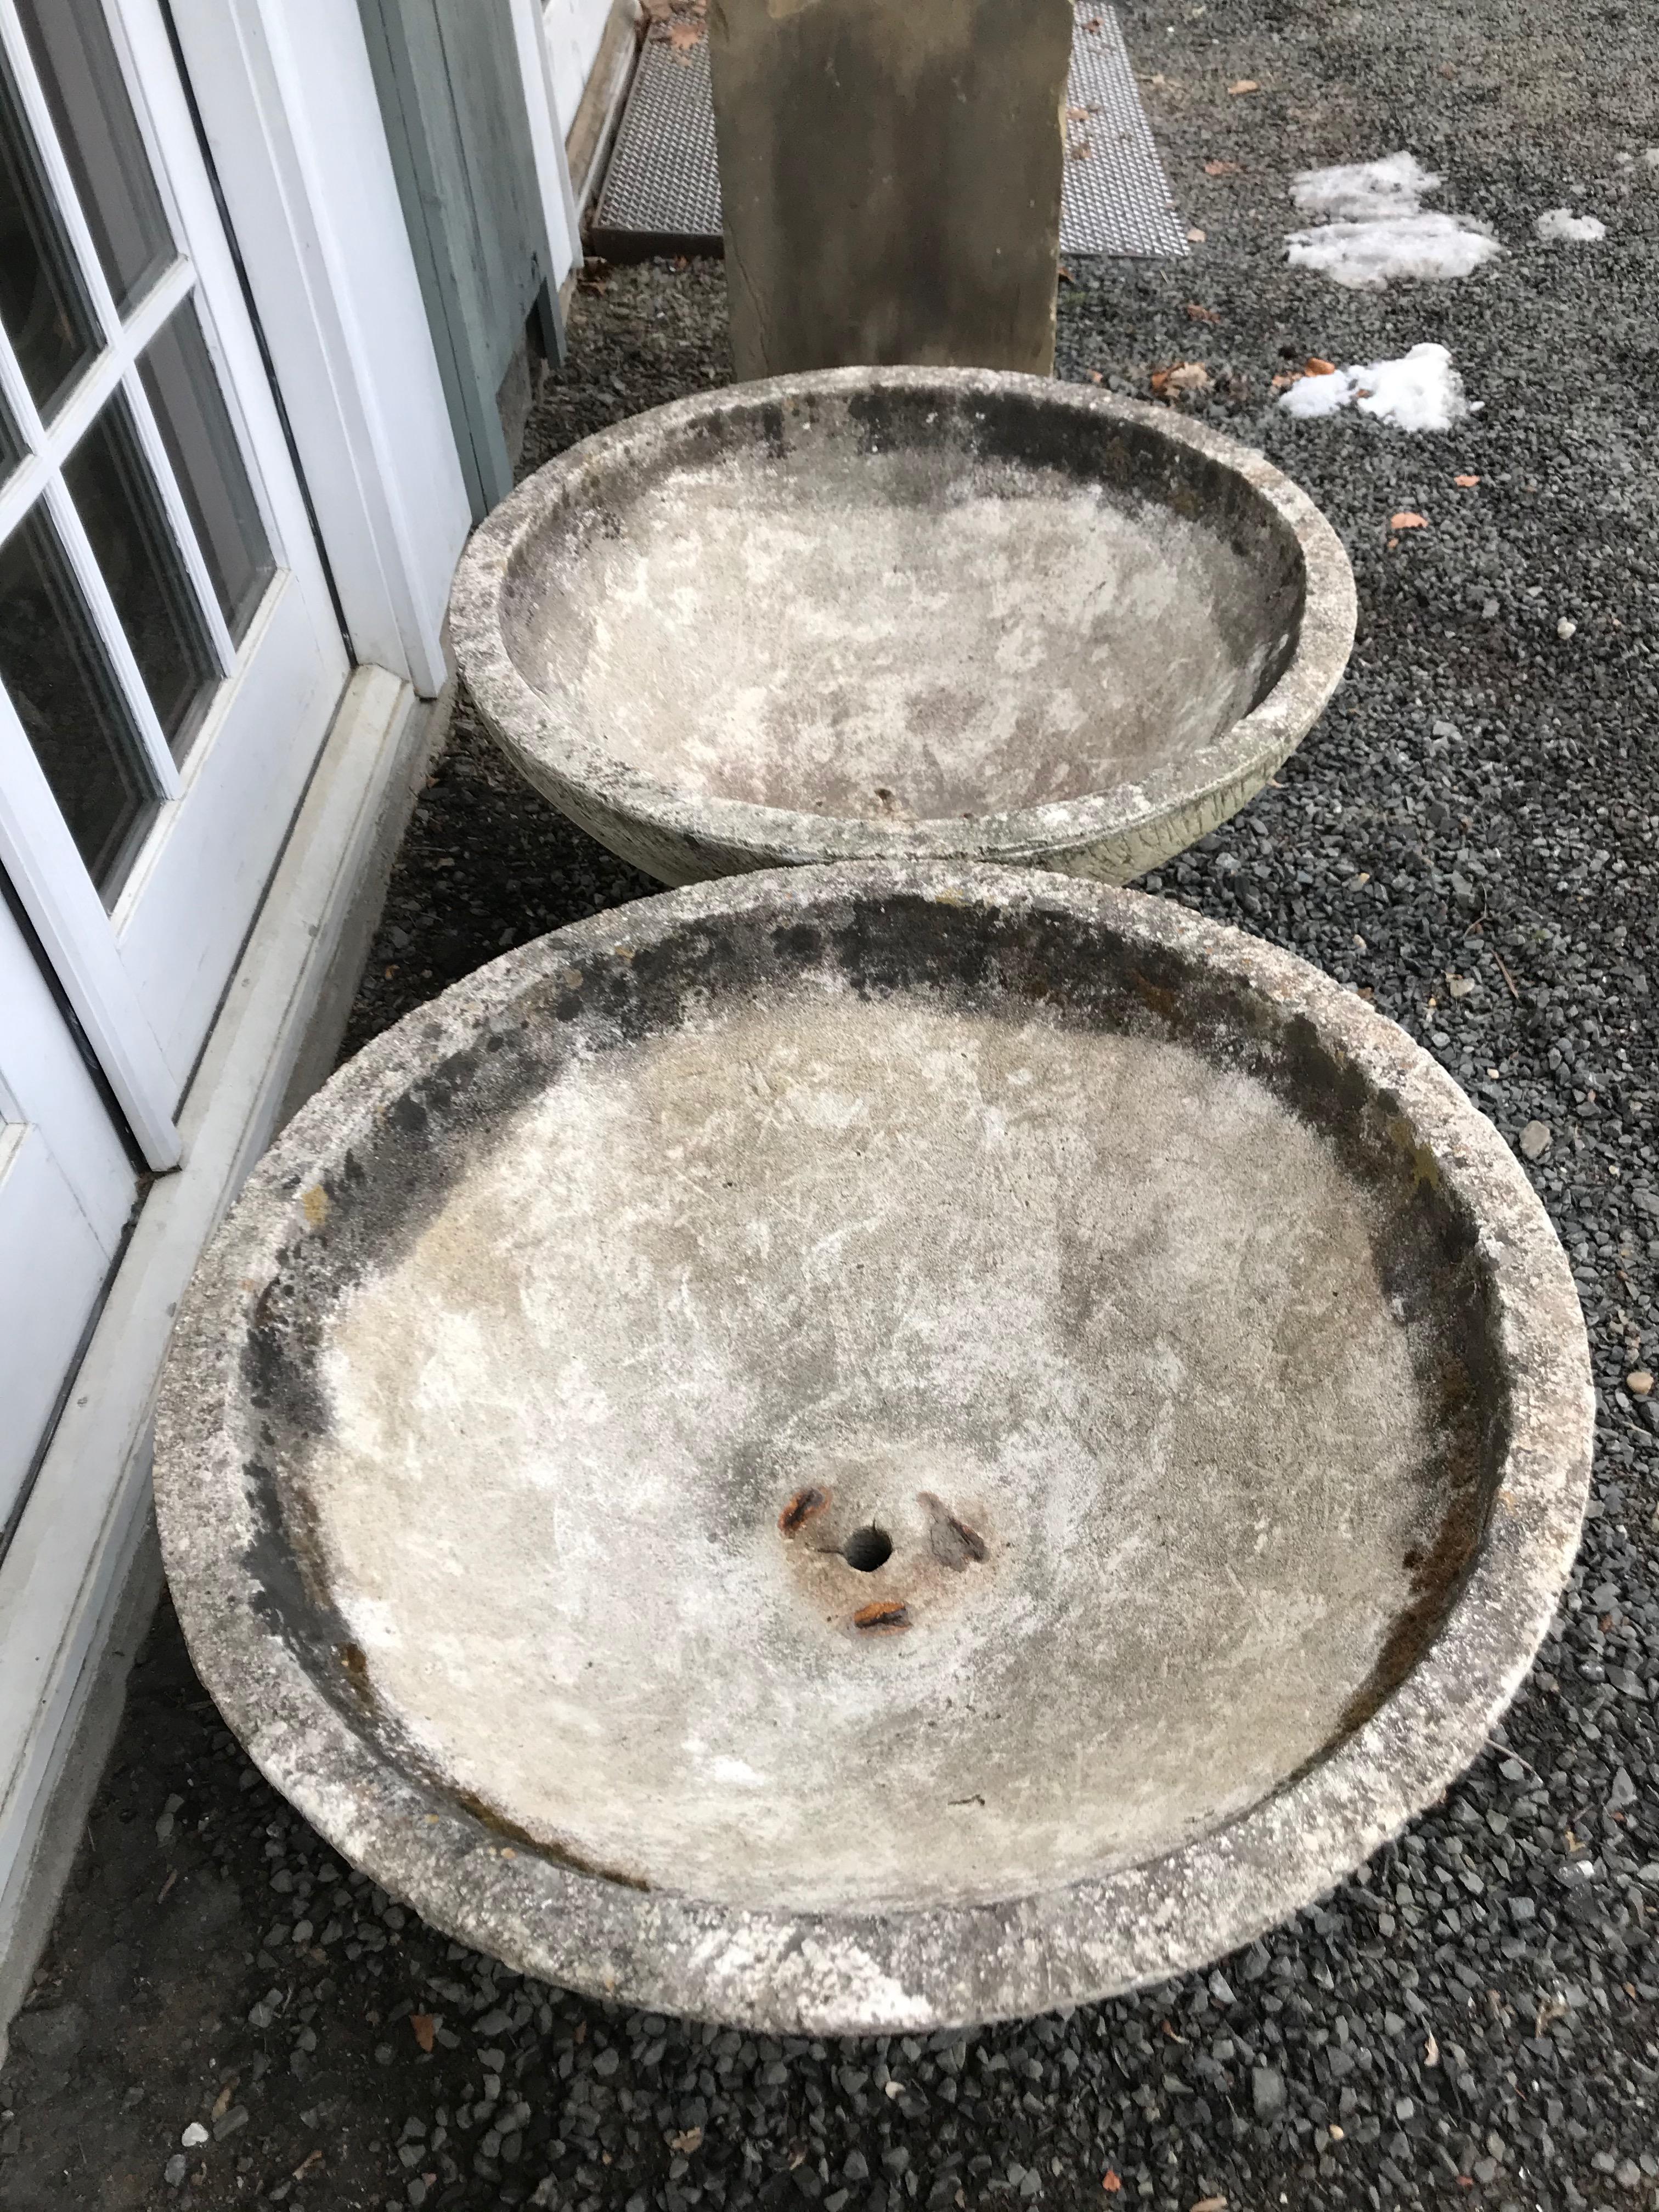 Pair of Large Round French Cast Stone Bowl Planters on Integral Feet #1 im Zustand „Gut“ in Woodbury, CT